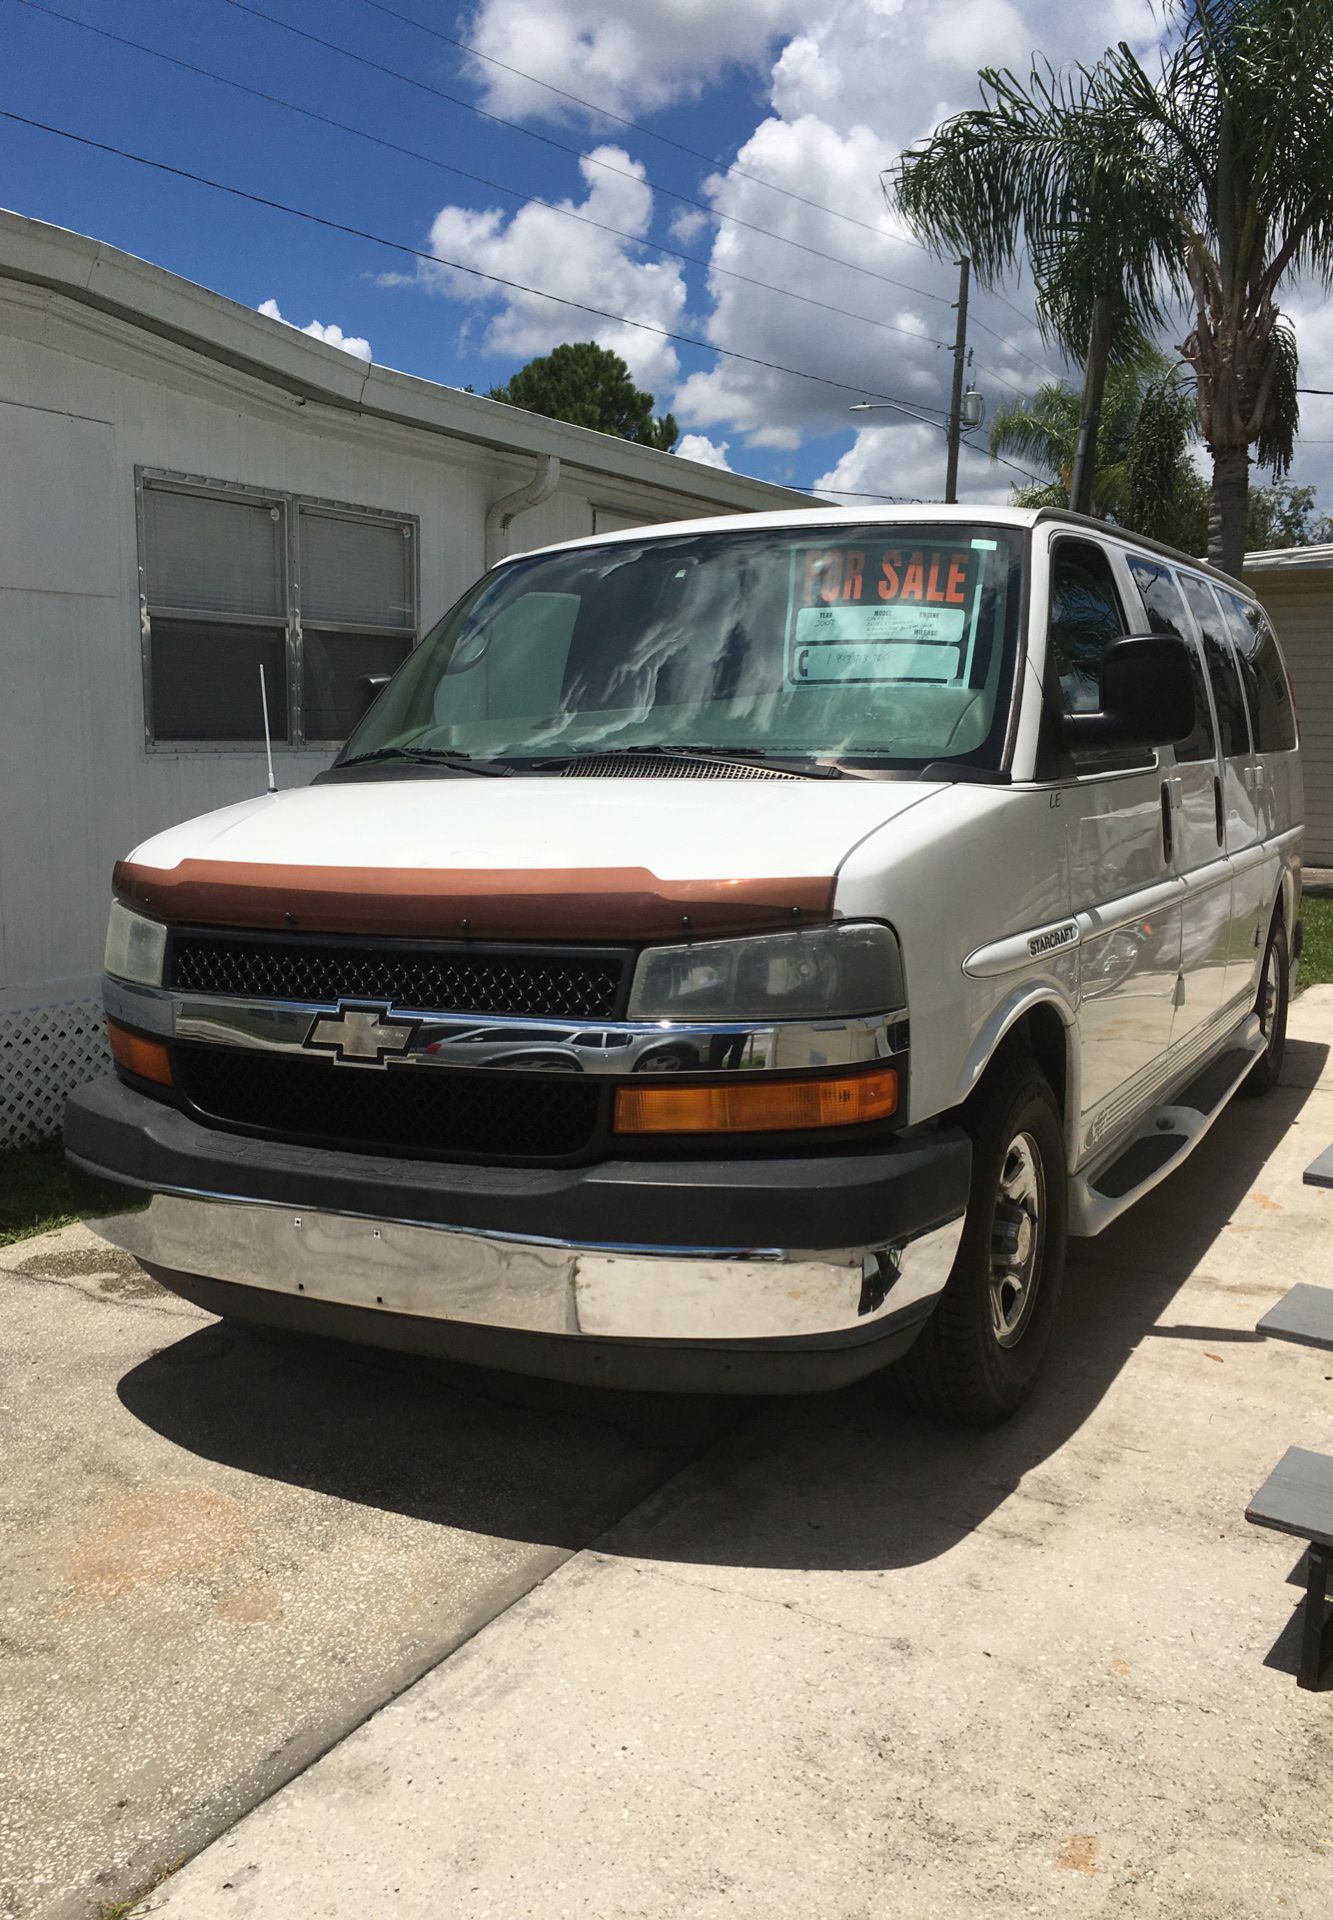 2007 Chevy Van 1500 express Starcraft handicap van never out of Florida asking 20 thousand to pay off loan to get car permit